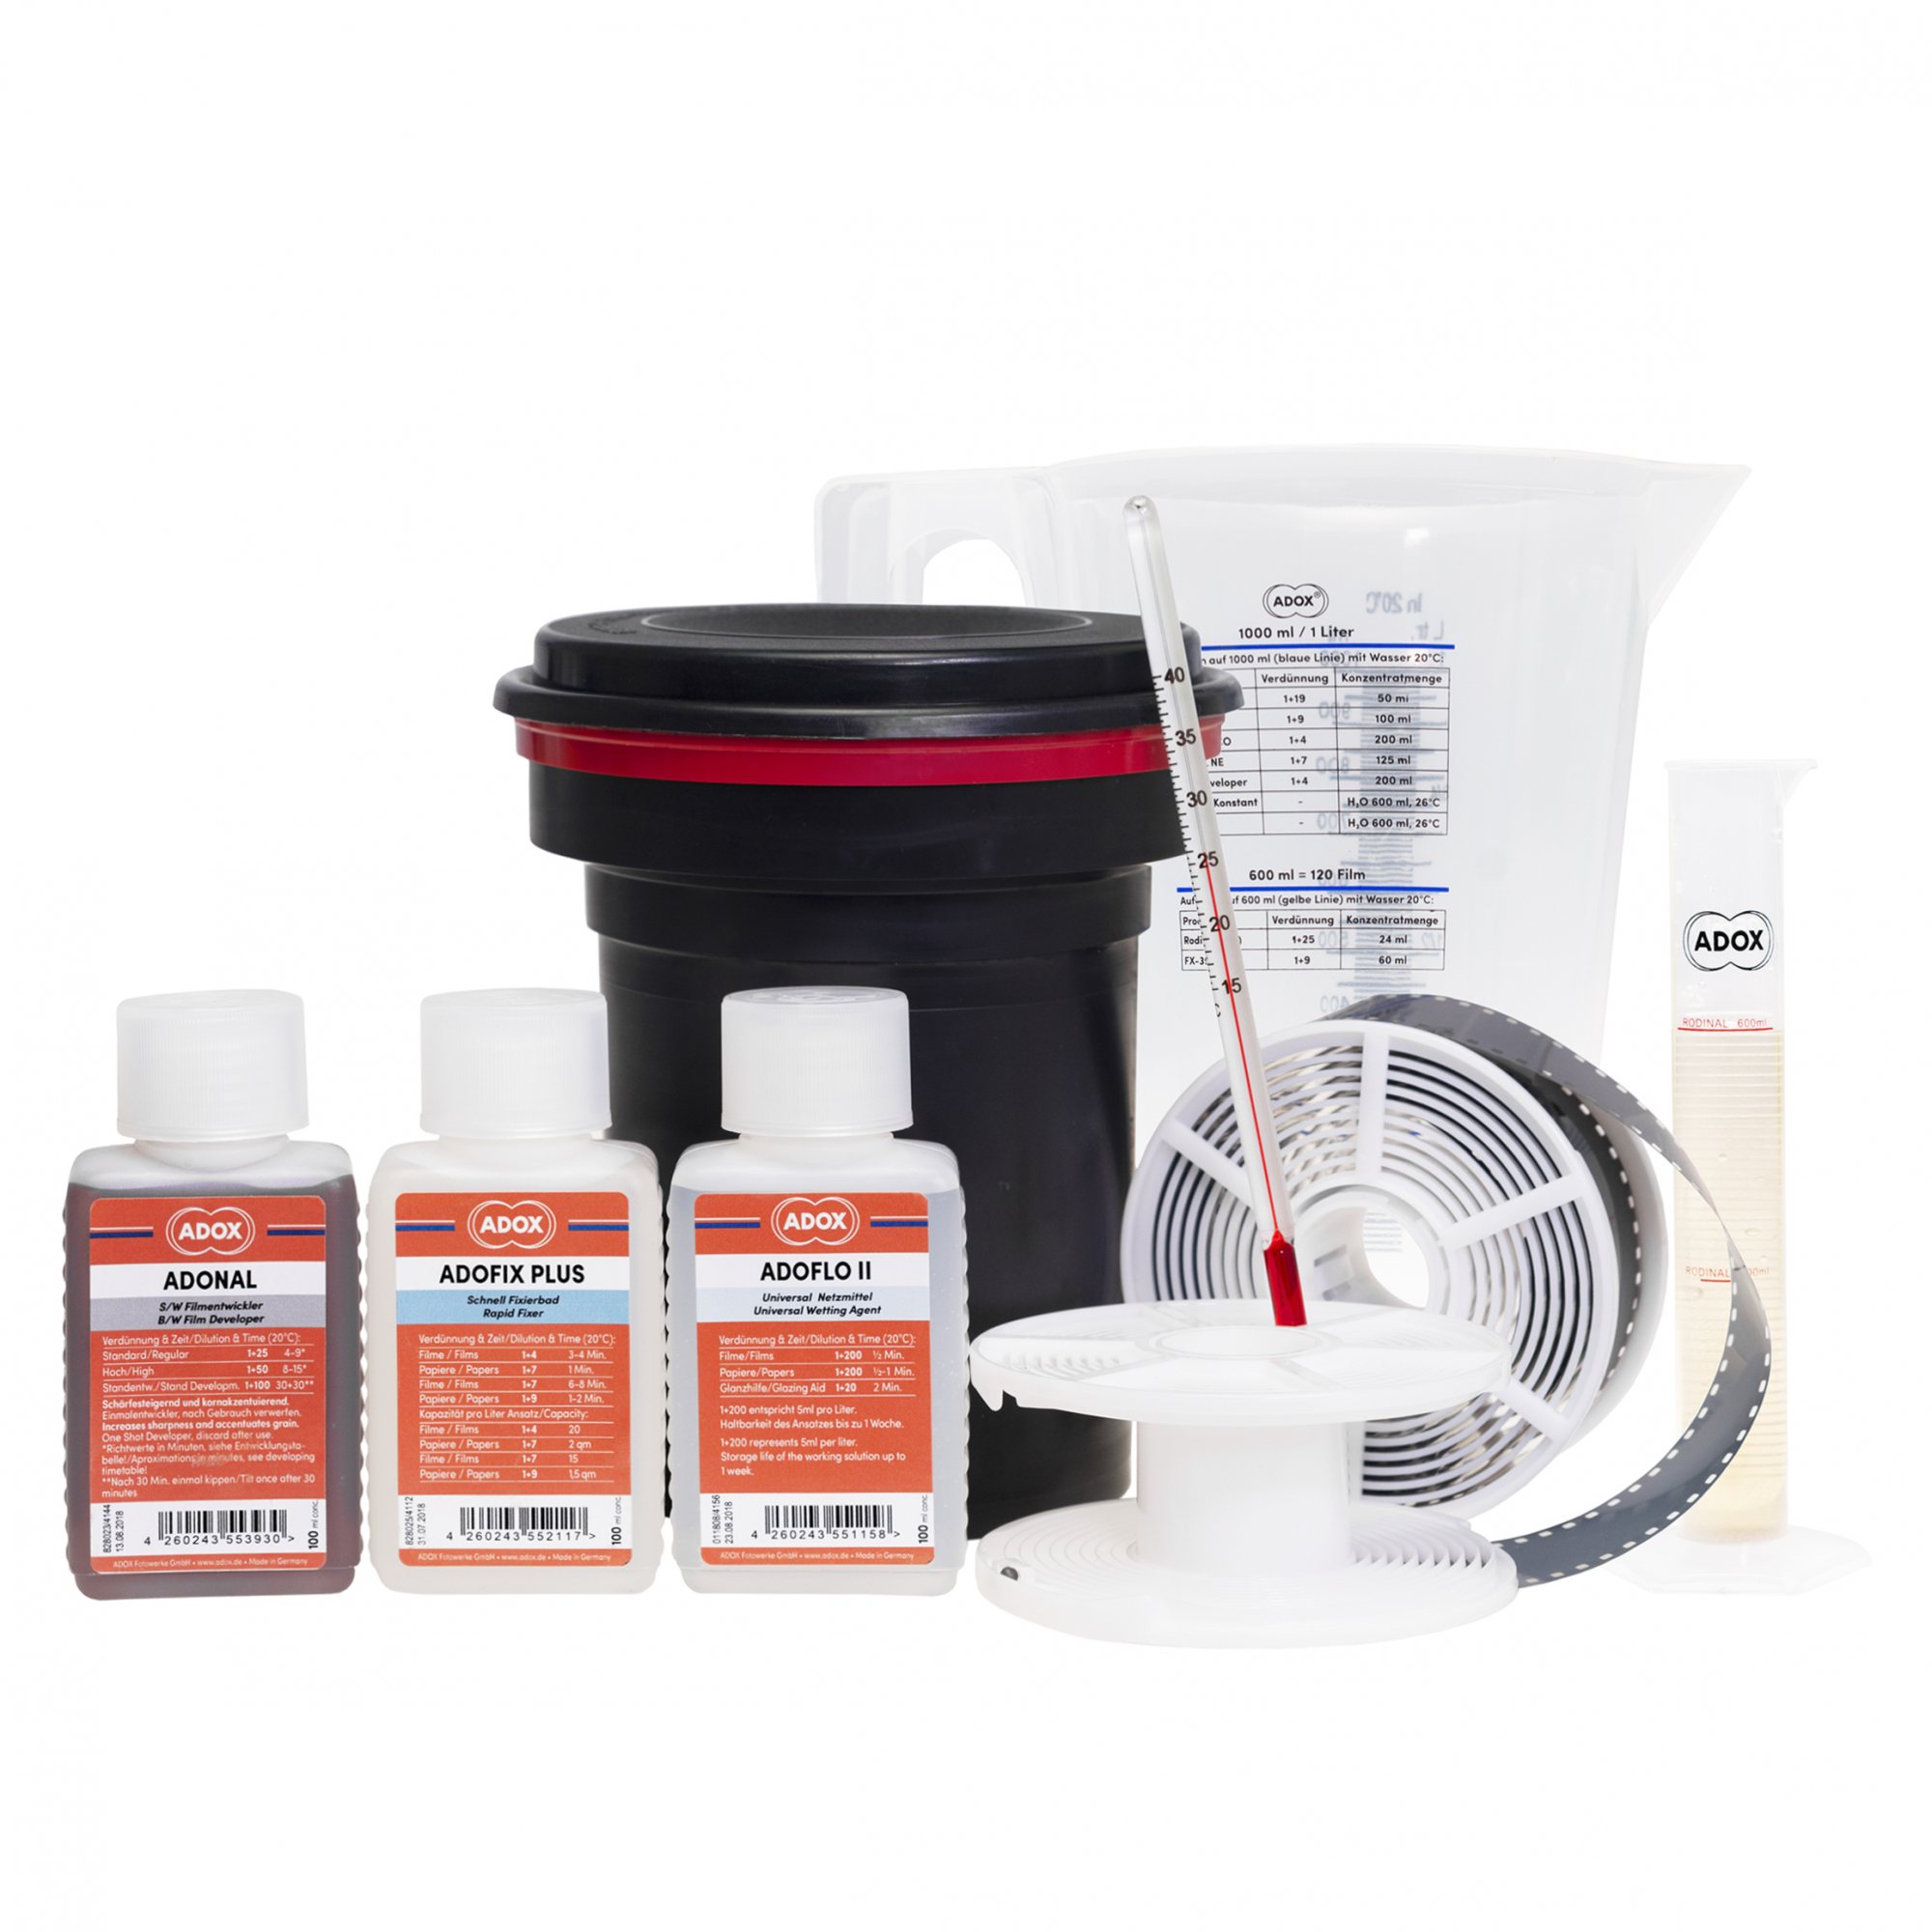 Adox Starter Developing Kit for Black and White Film Film Processing